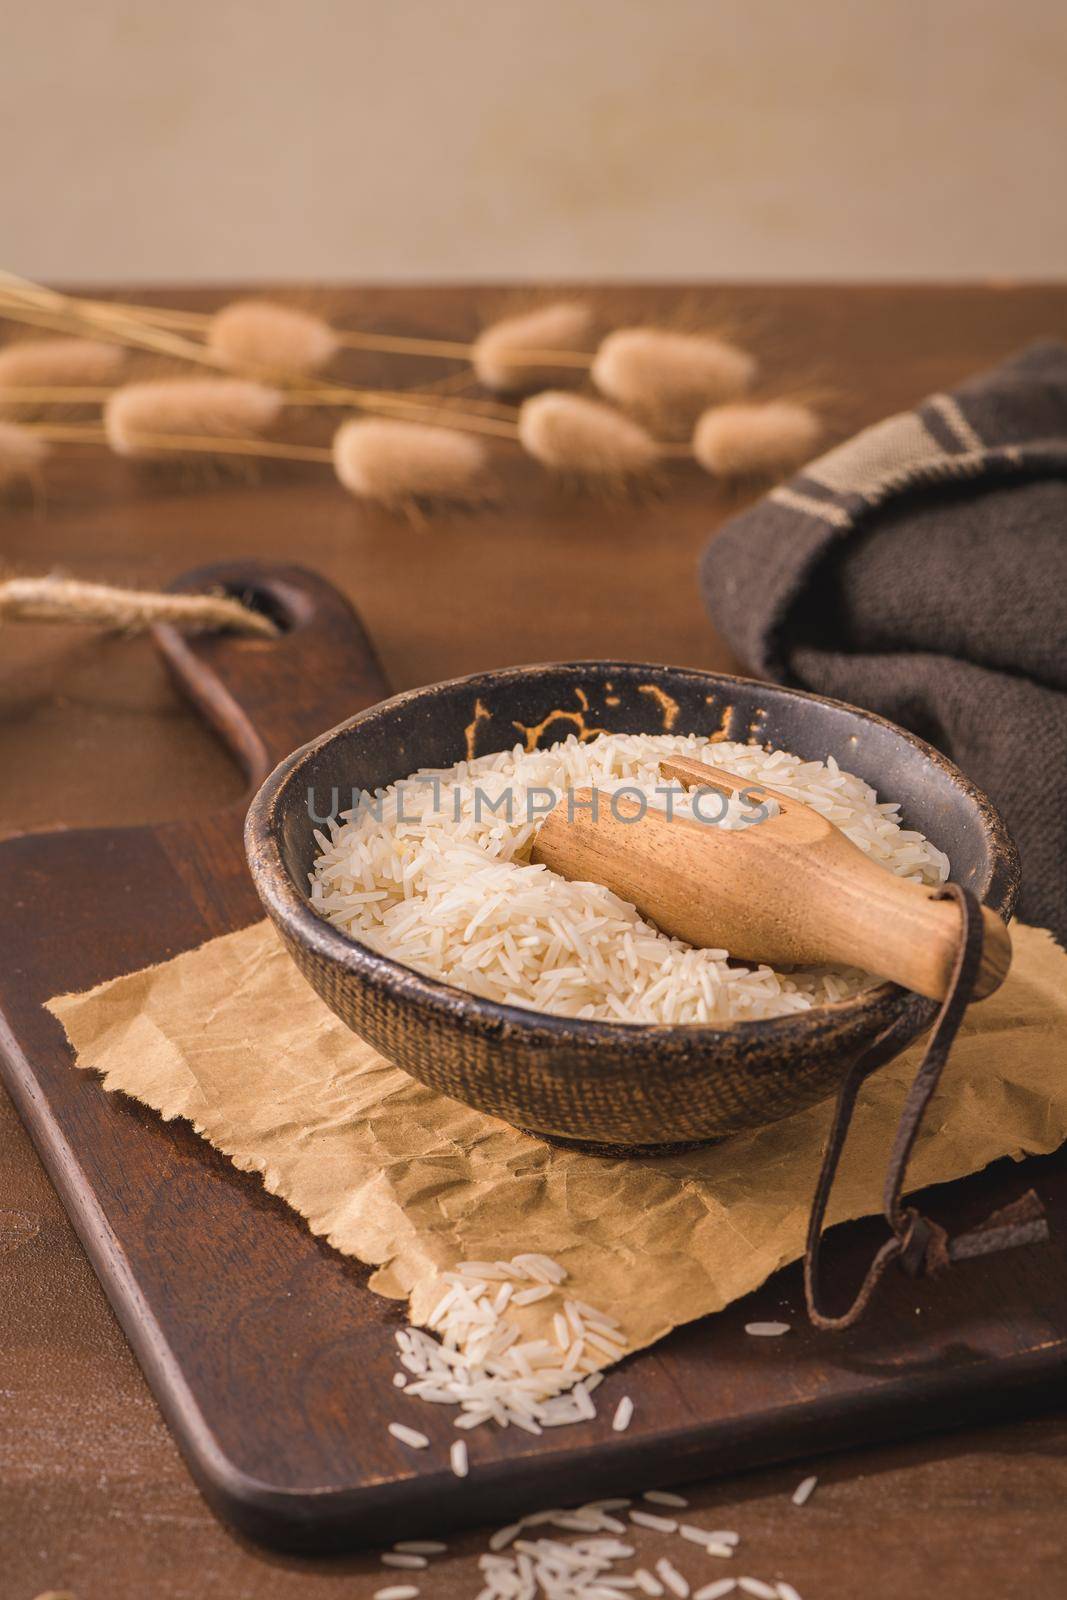 Basmati rice in ceramic bowl with wooden scoop on rustic countertop.